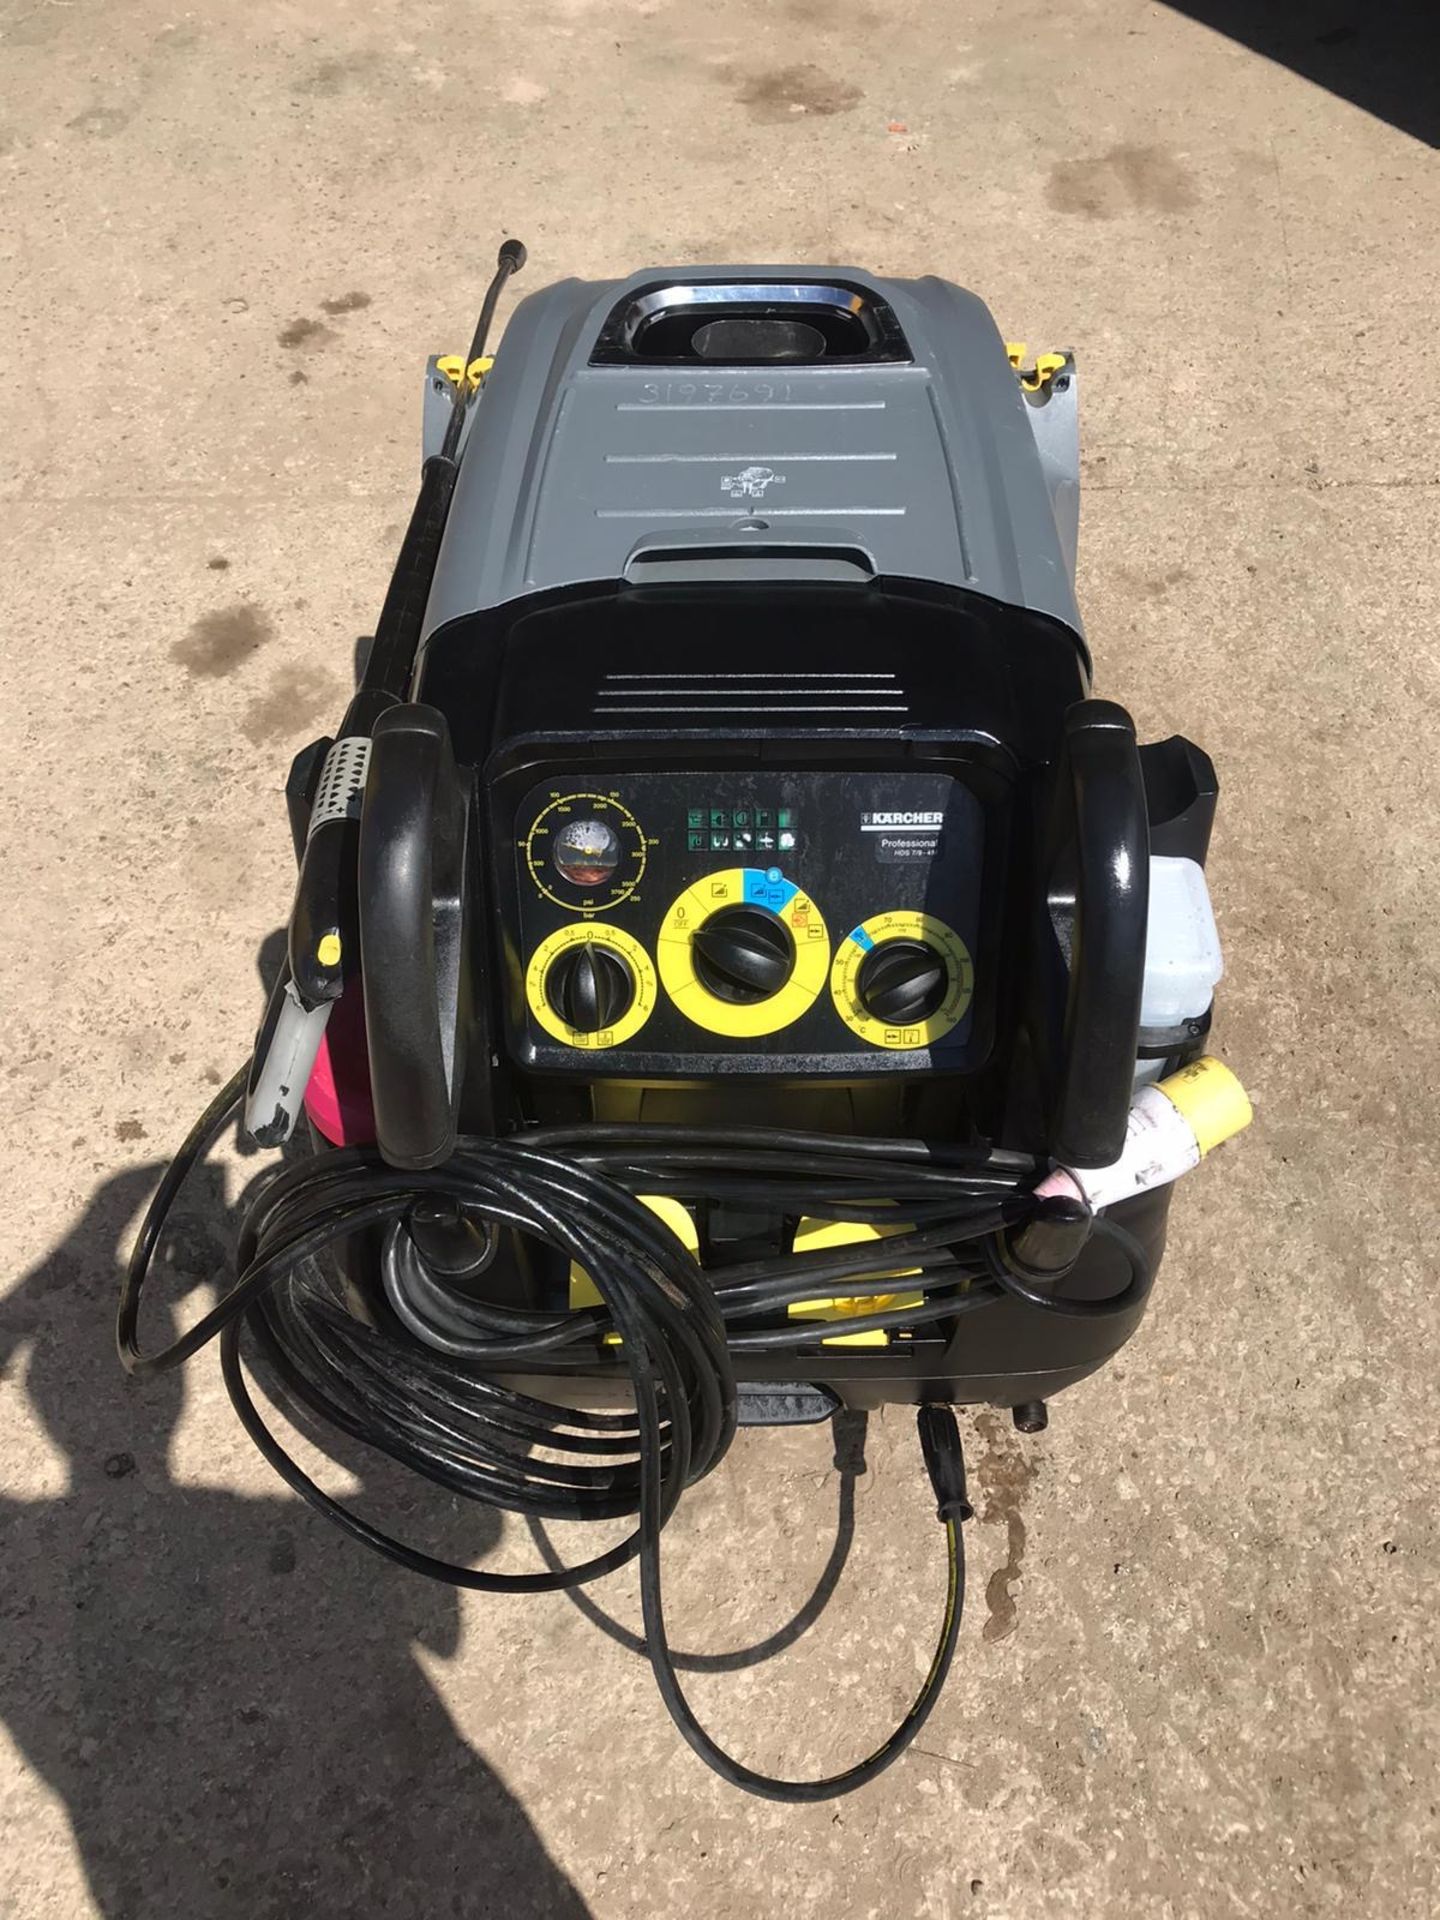 KARCHER 7/9 - 4M PROFESSIONAL 110V HIGH PRESSURE WASHER, YEAR 2014, HOT & COLD STEAM CLEANER - Image 11 of 11